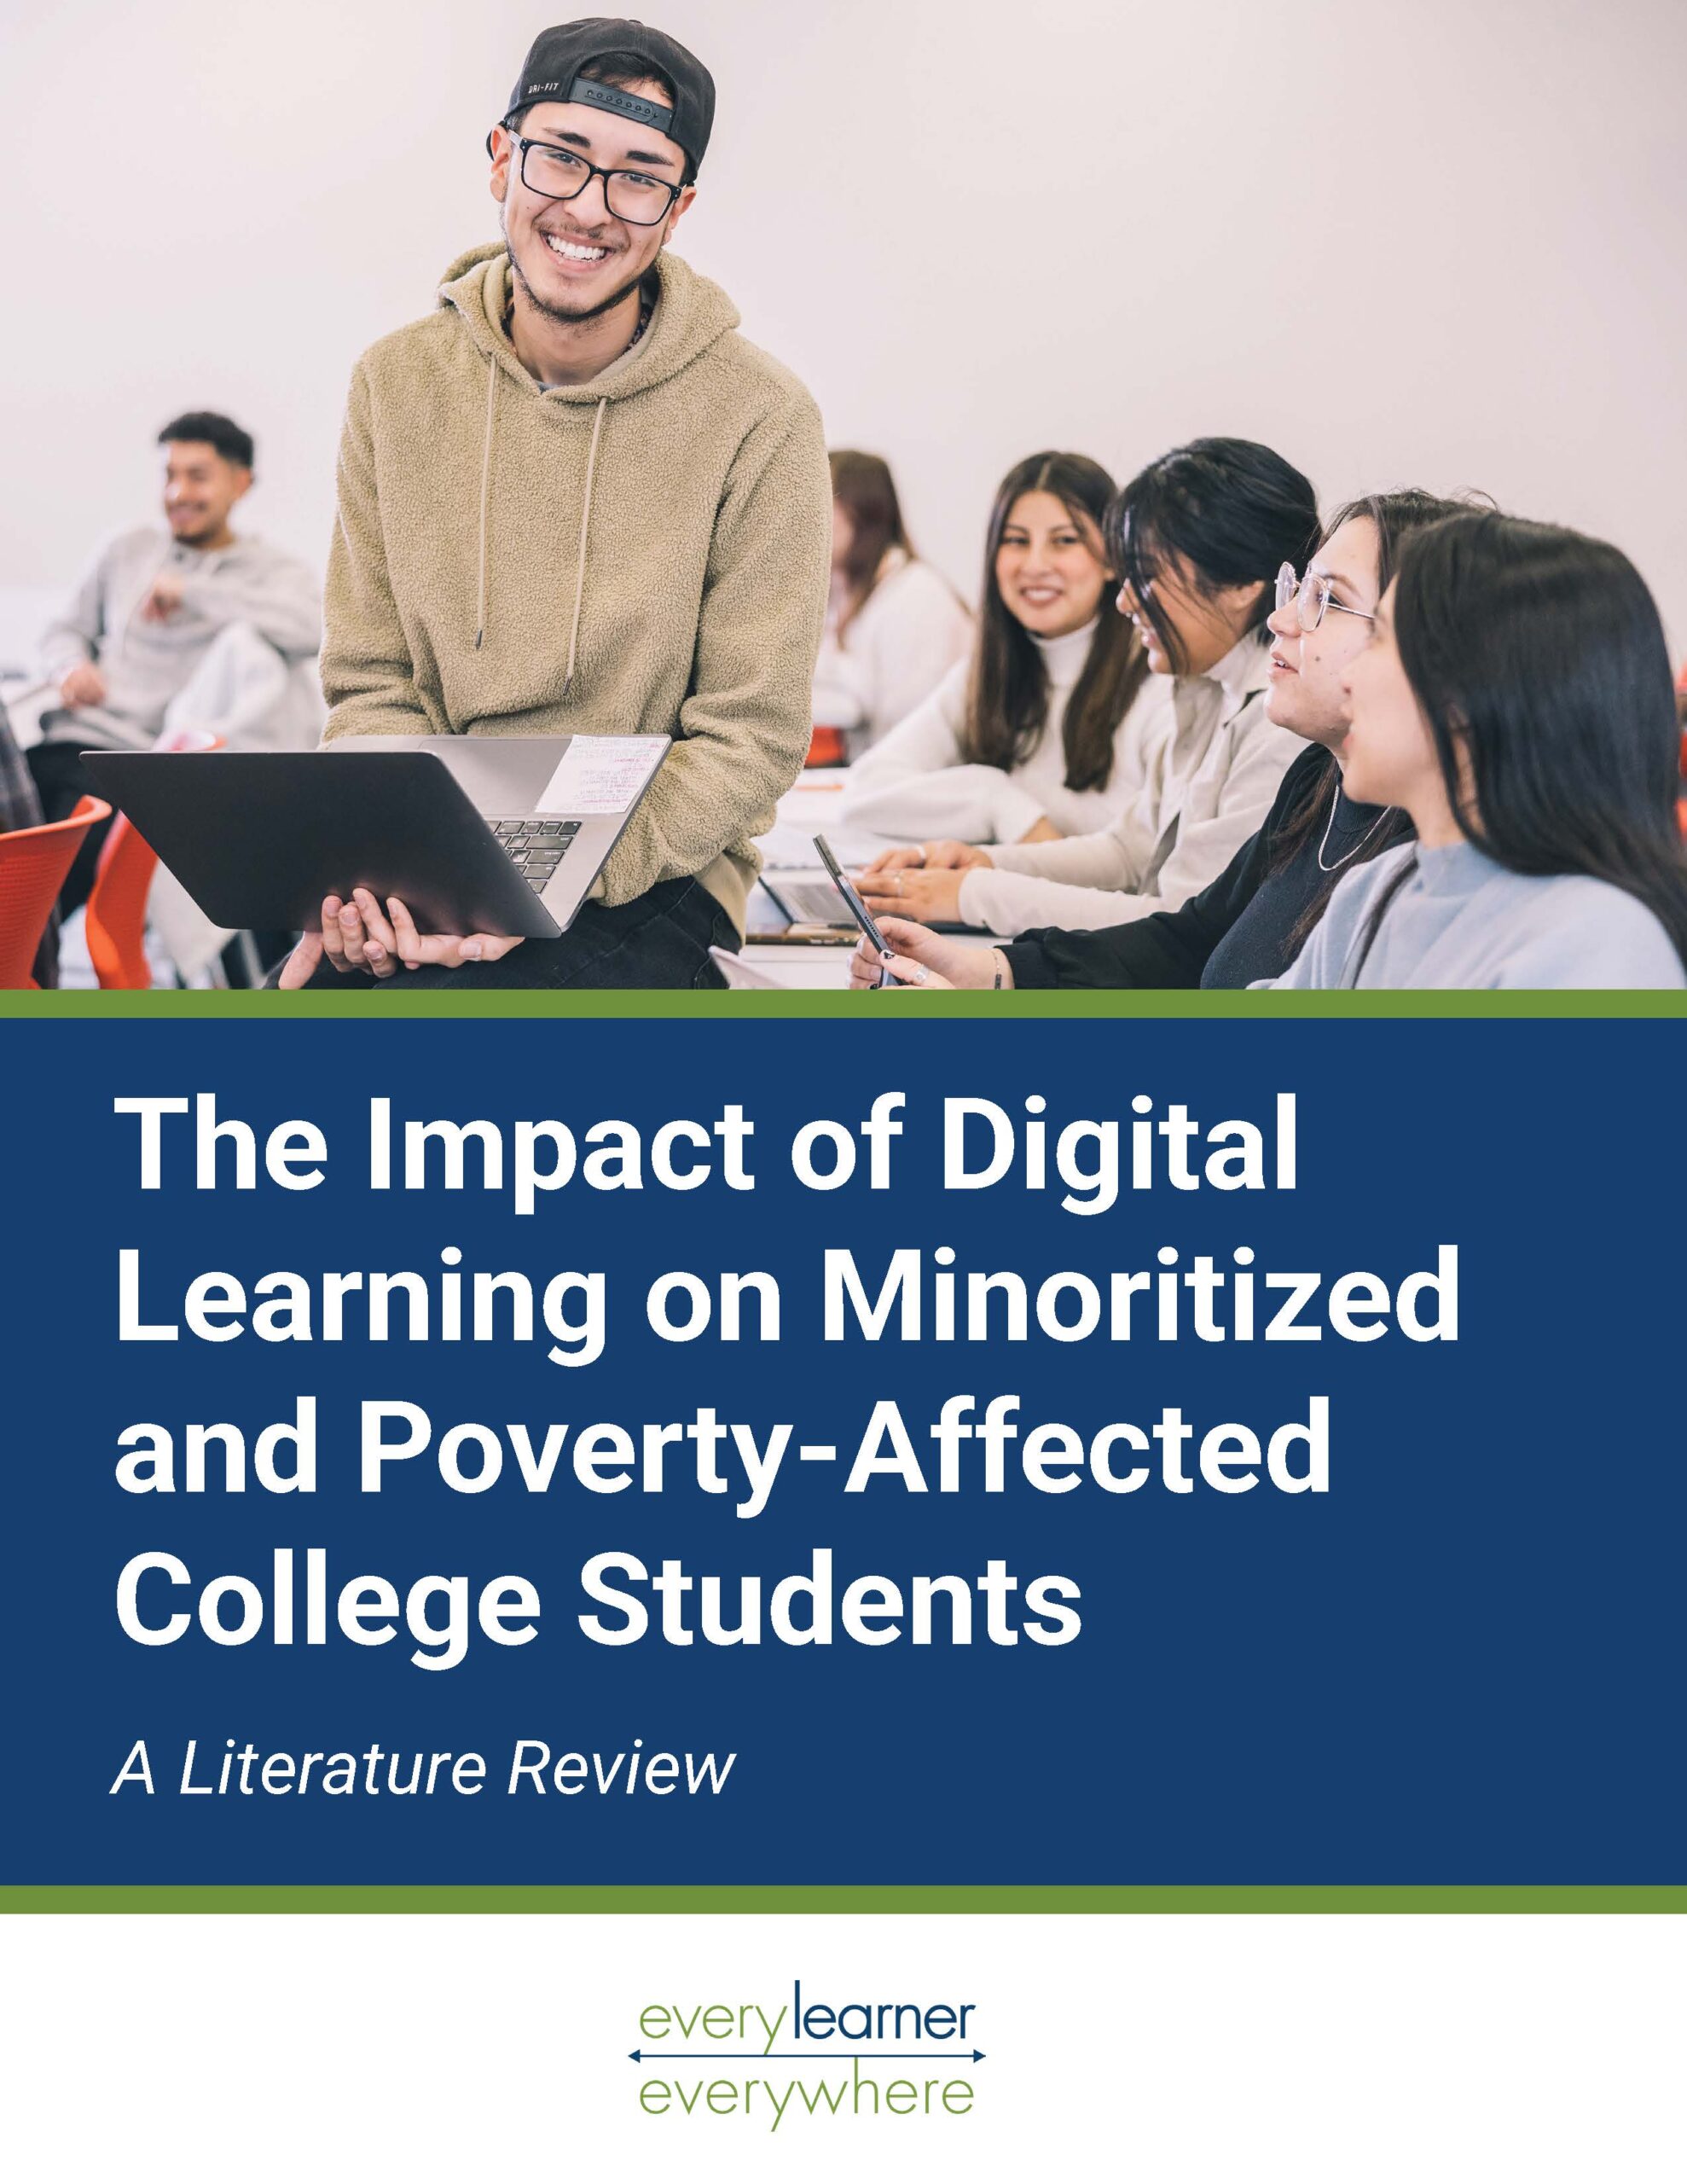 The Impact of Digital Learning on Minoritized and Poverty-Affected College Students Cover Page with photo of students in classroom and title.